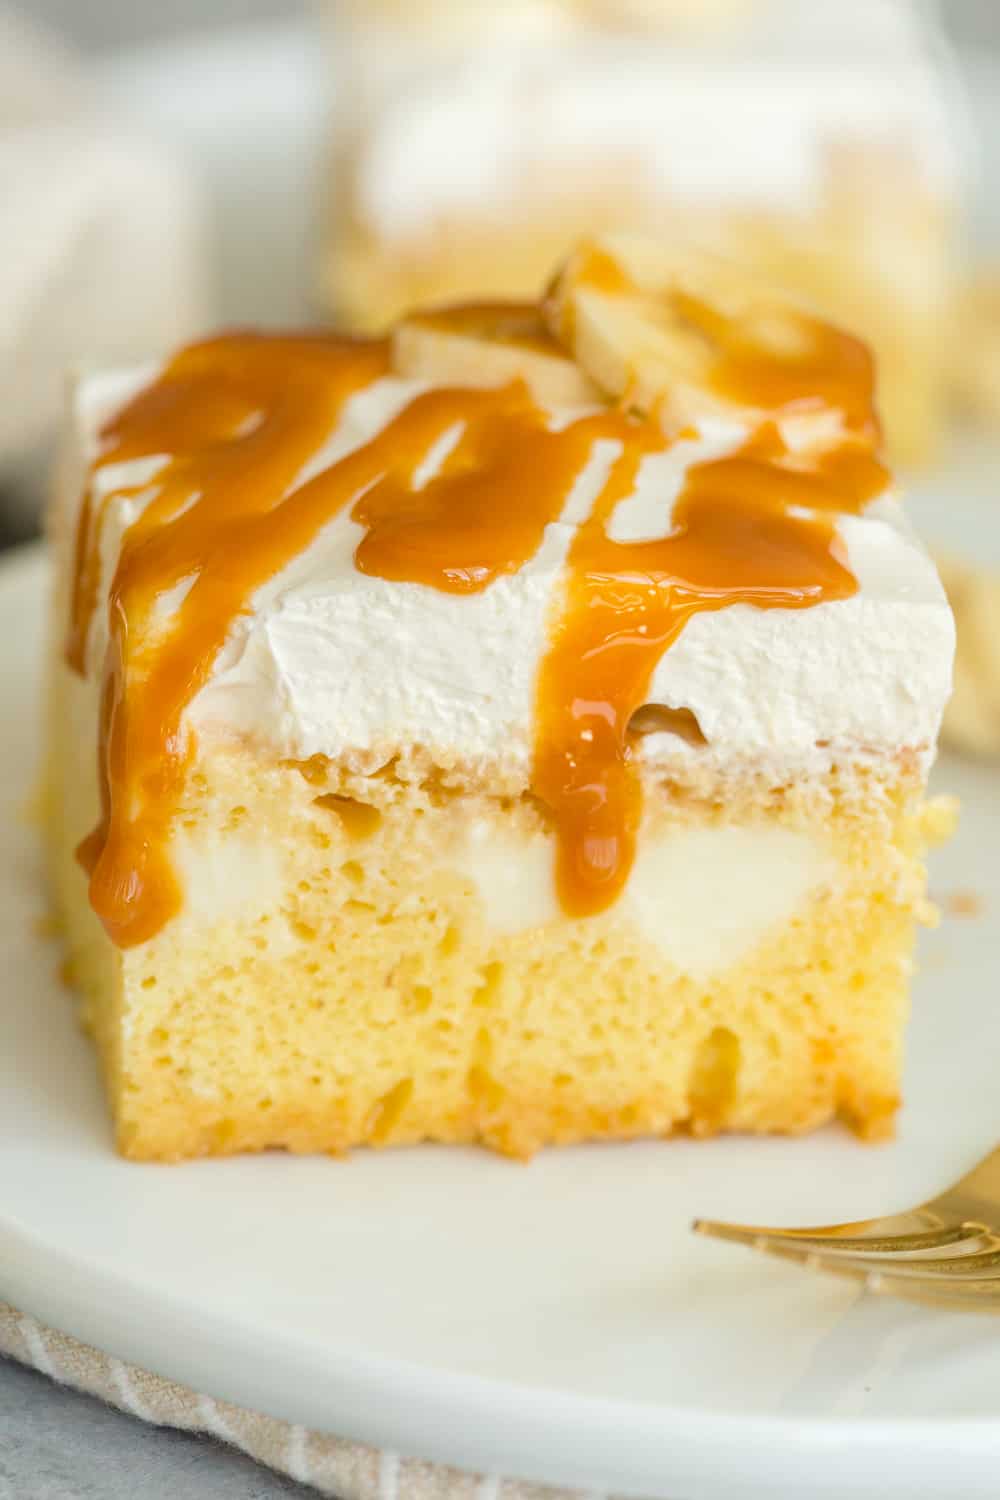 15 Absolutely Tempting Poke Cake Recipes To Perk You Up